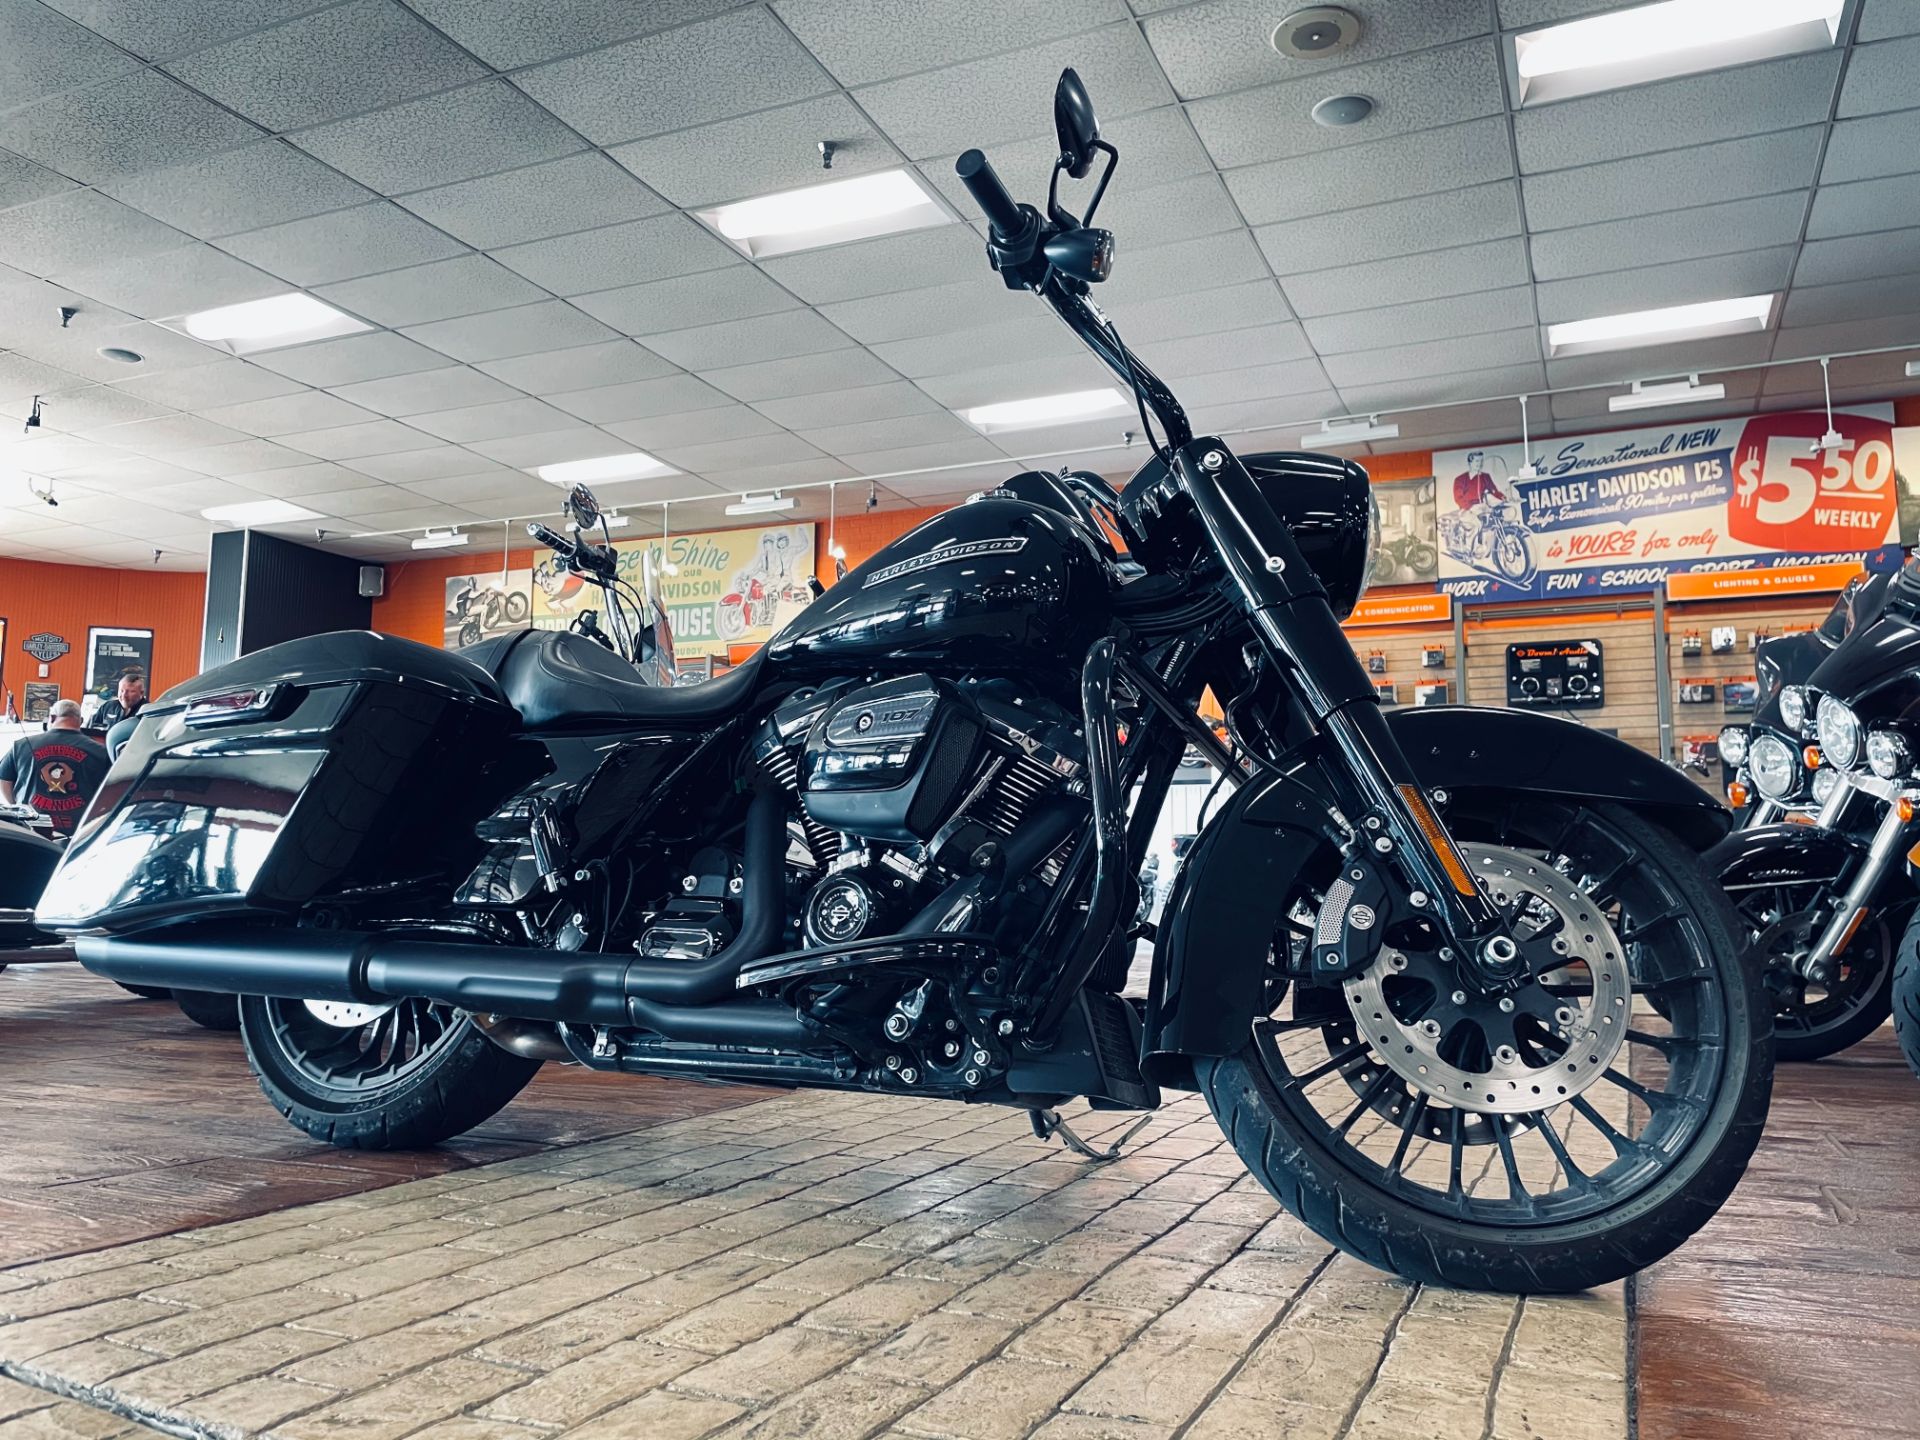 2018 Harley-Davidson Road King Special in Marion, Illinois - Photo 1